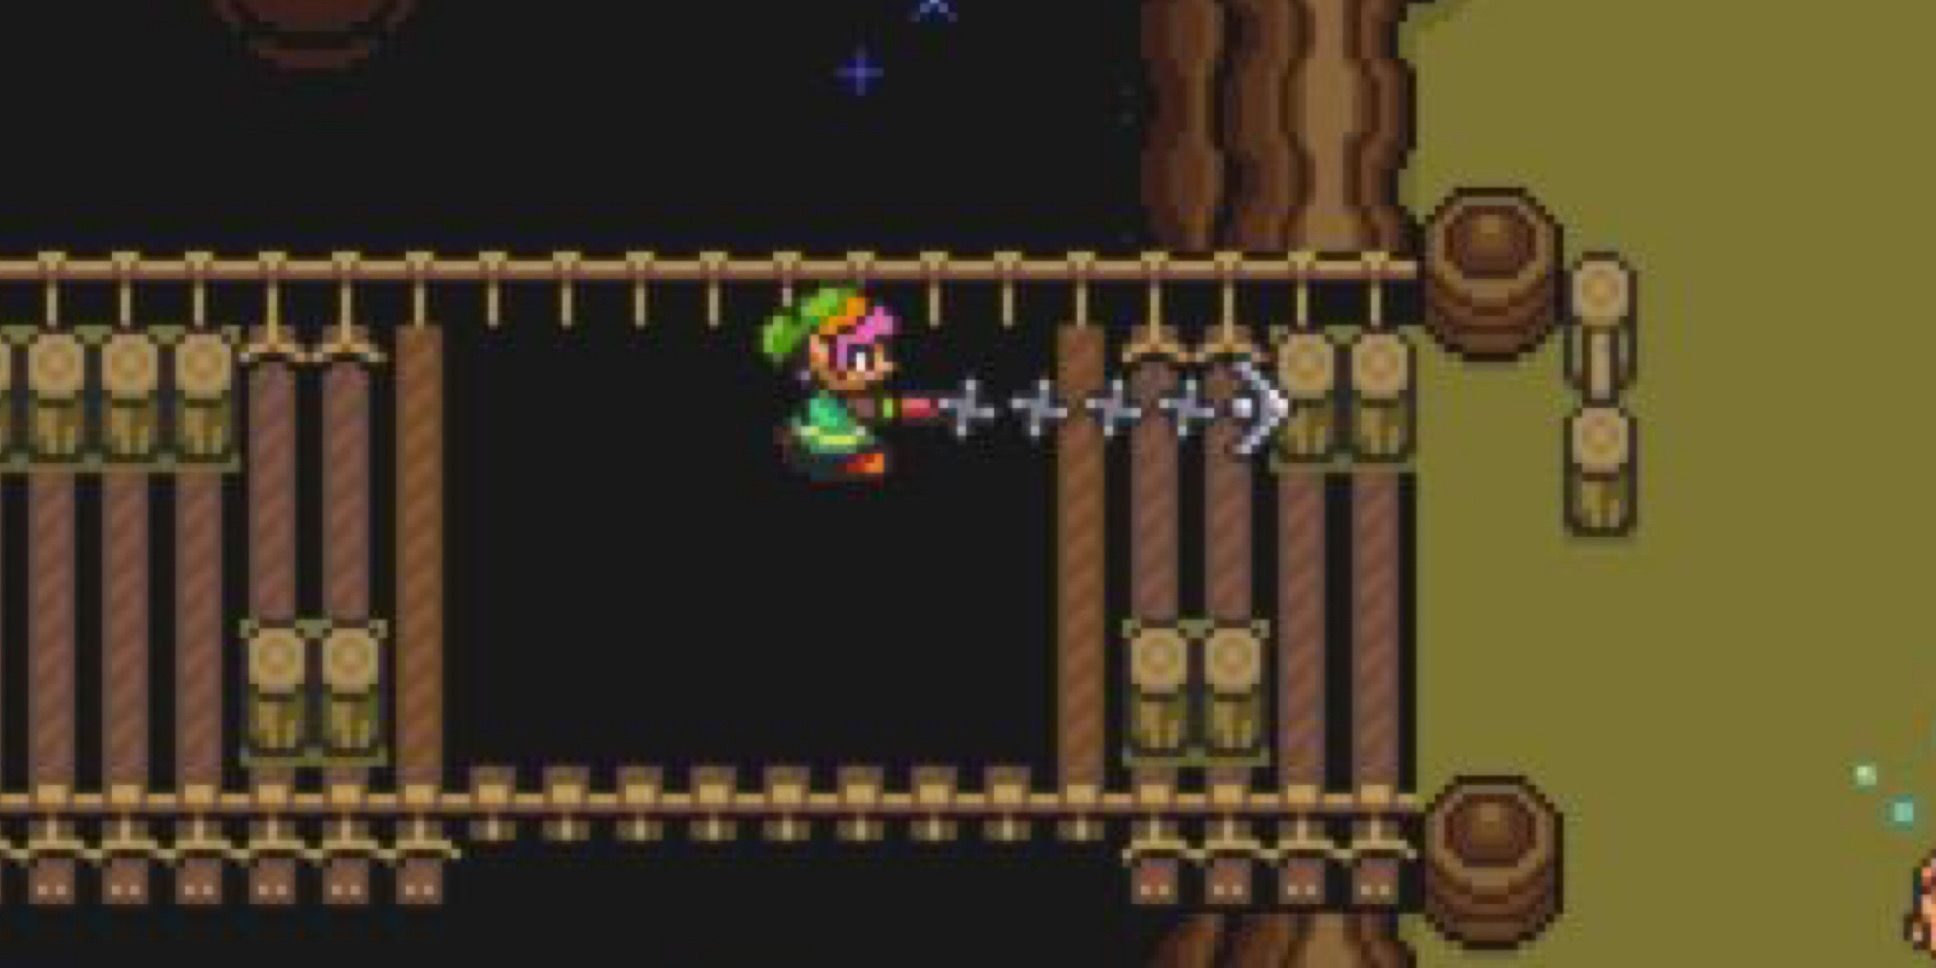 Link using the hookshot in The legend of Zelda A Link to the Past